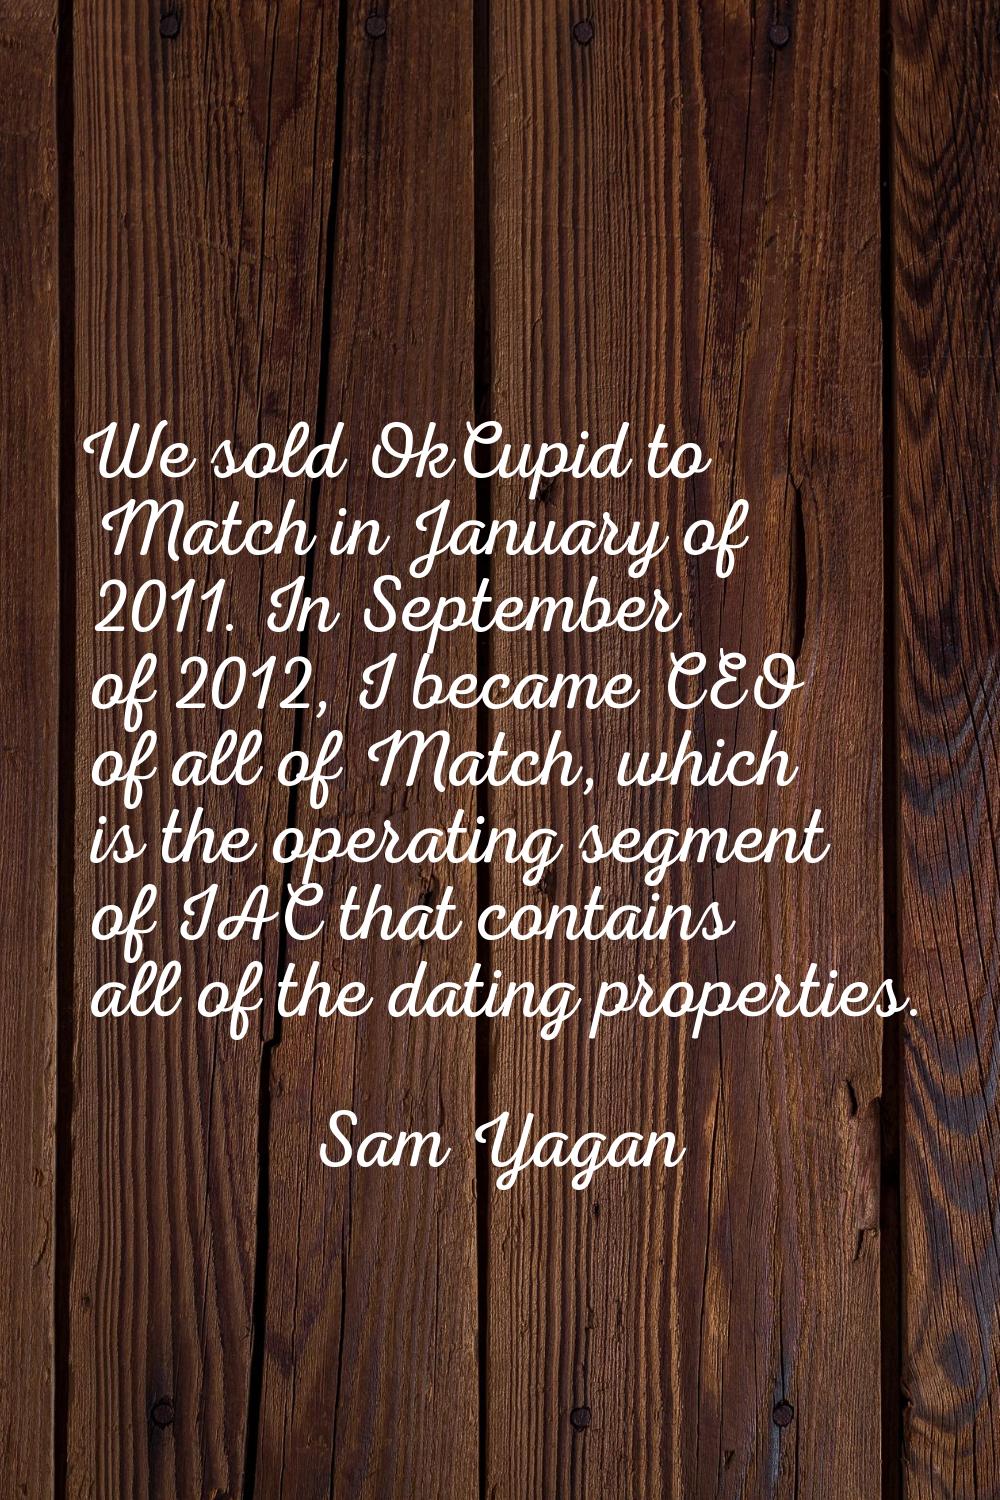 We sold OkCupid to Match in January of 2011. In September of 2012, I became CEO of all of Match, wh